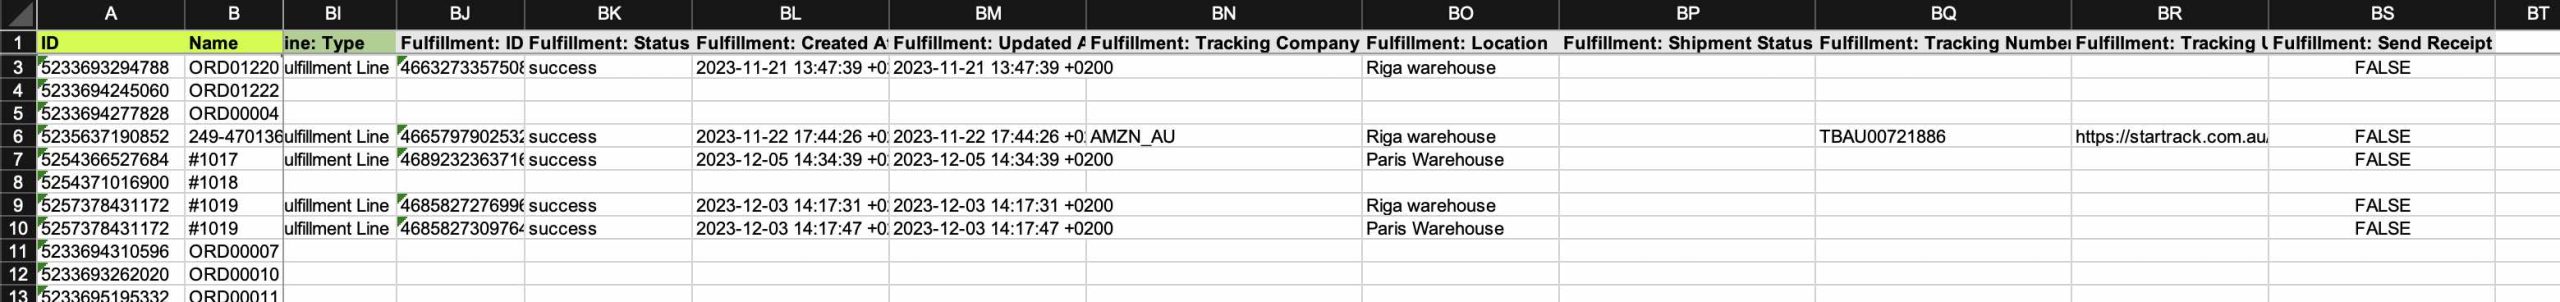 Exports with fulfillment locations